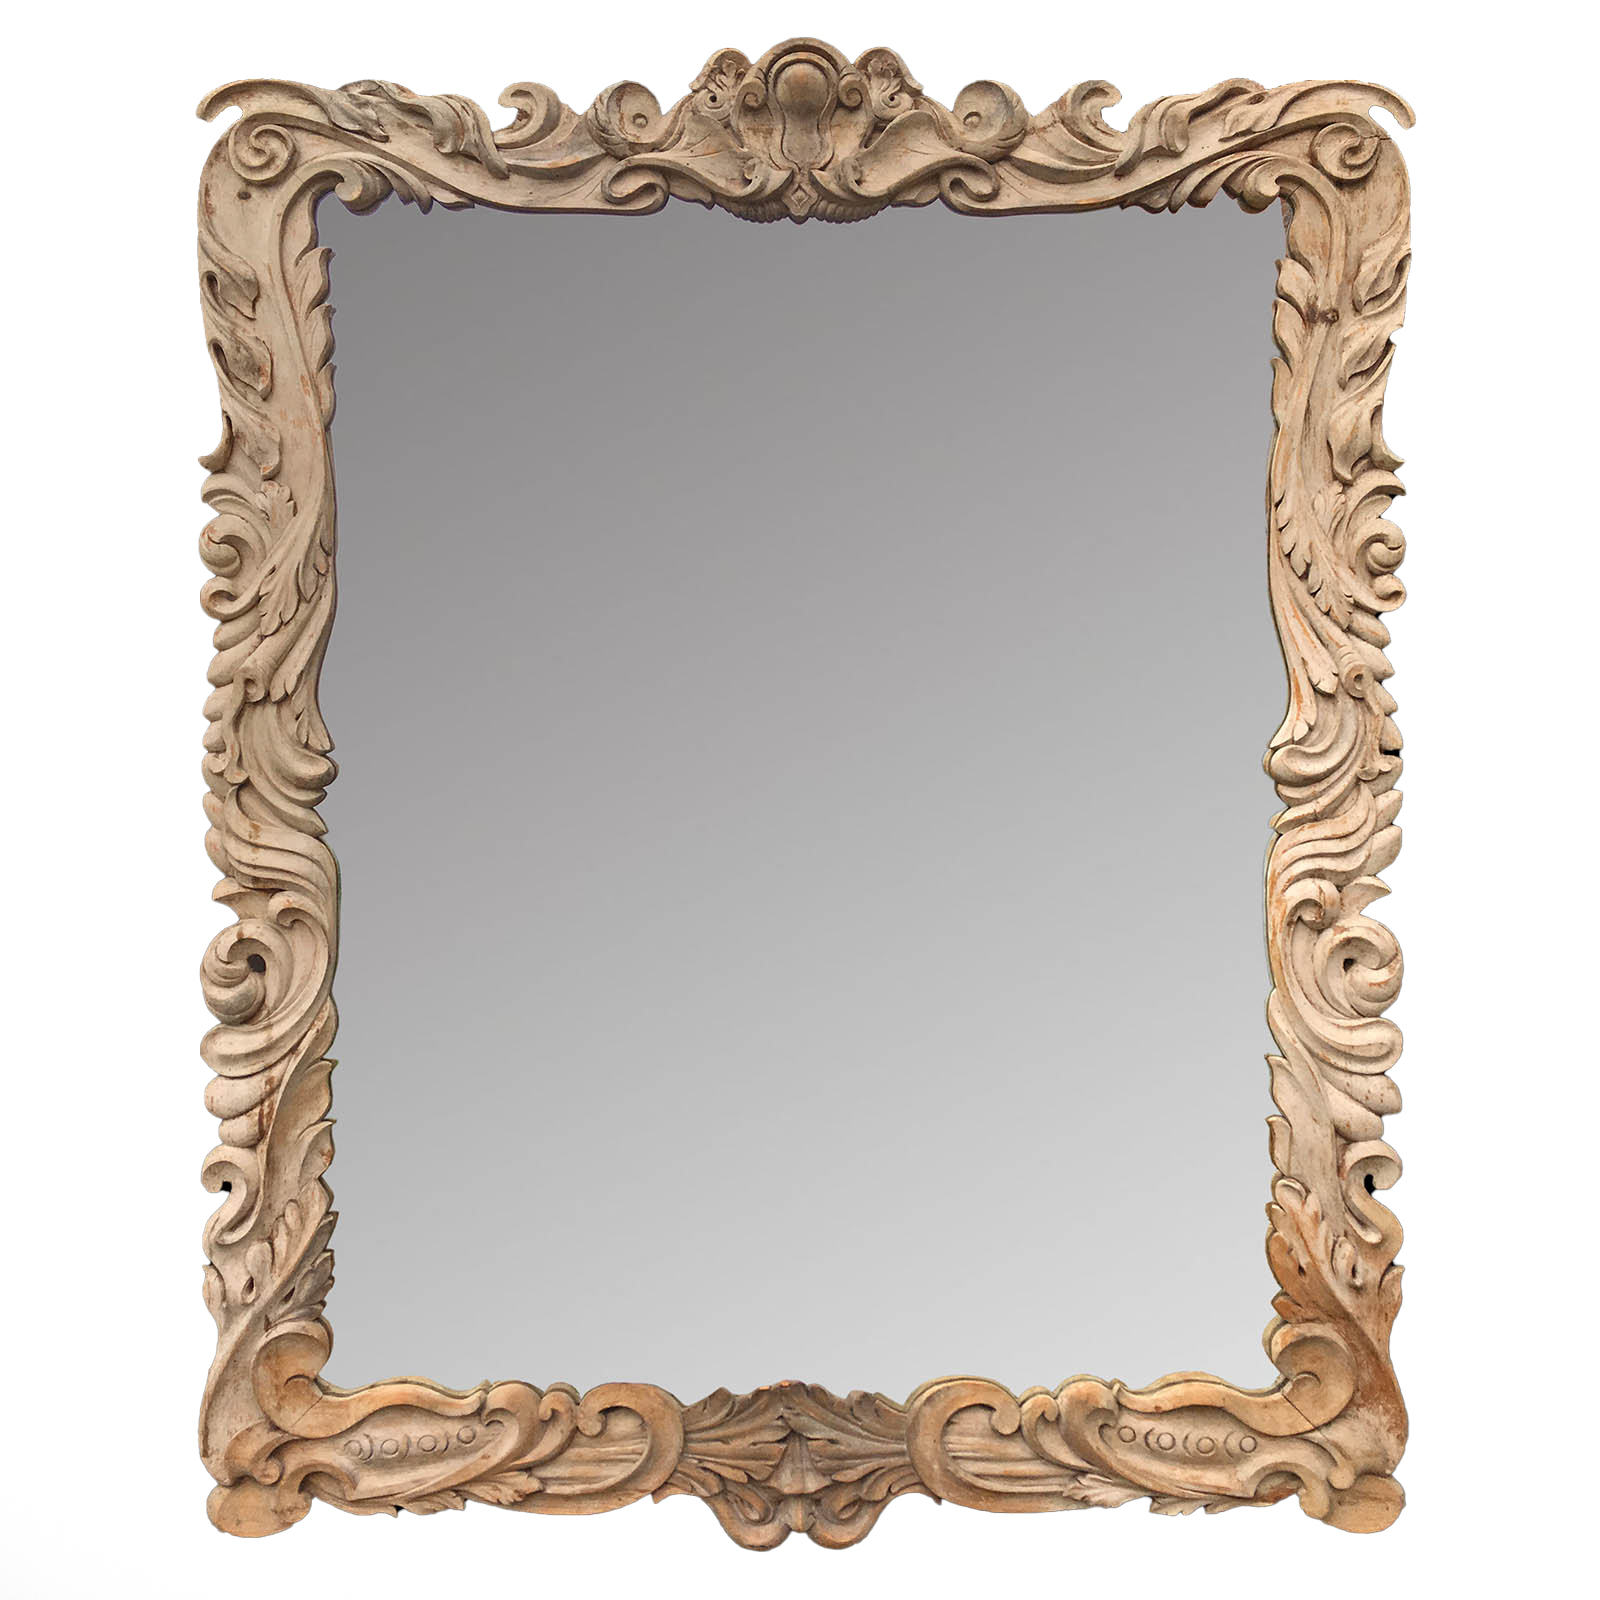 Auricular hand carved mirror. Produced by Perceval Designs